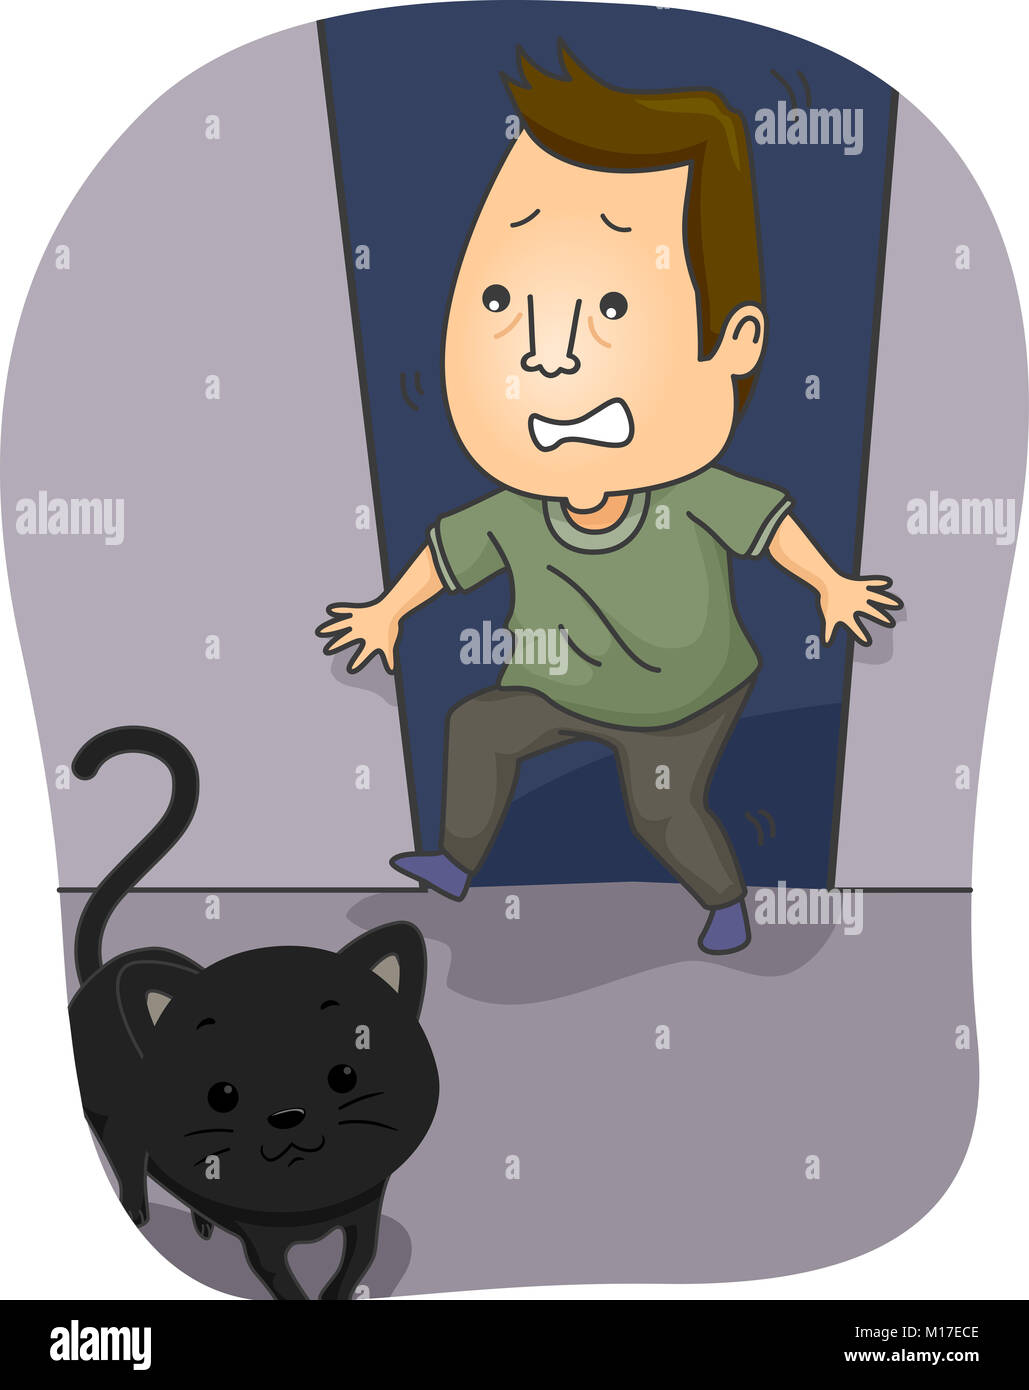 Illustration Featuring a Scared Man Panicking After Encountering a Black Cat Stock Photo